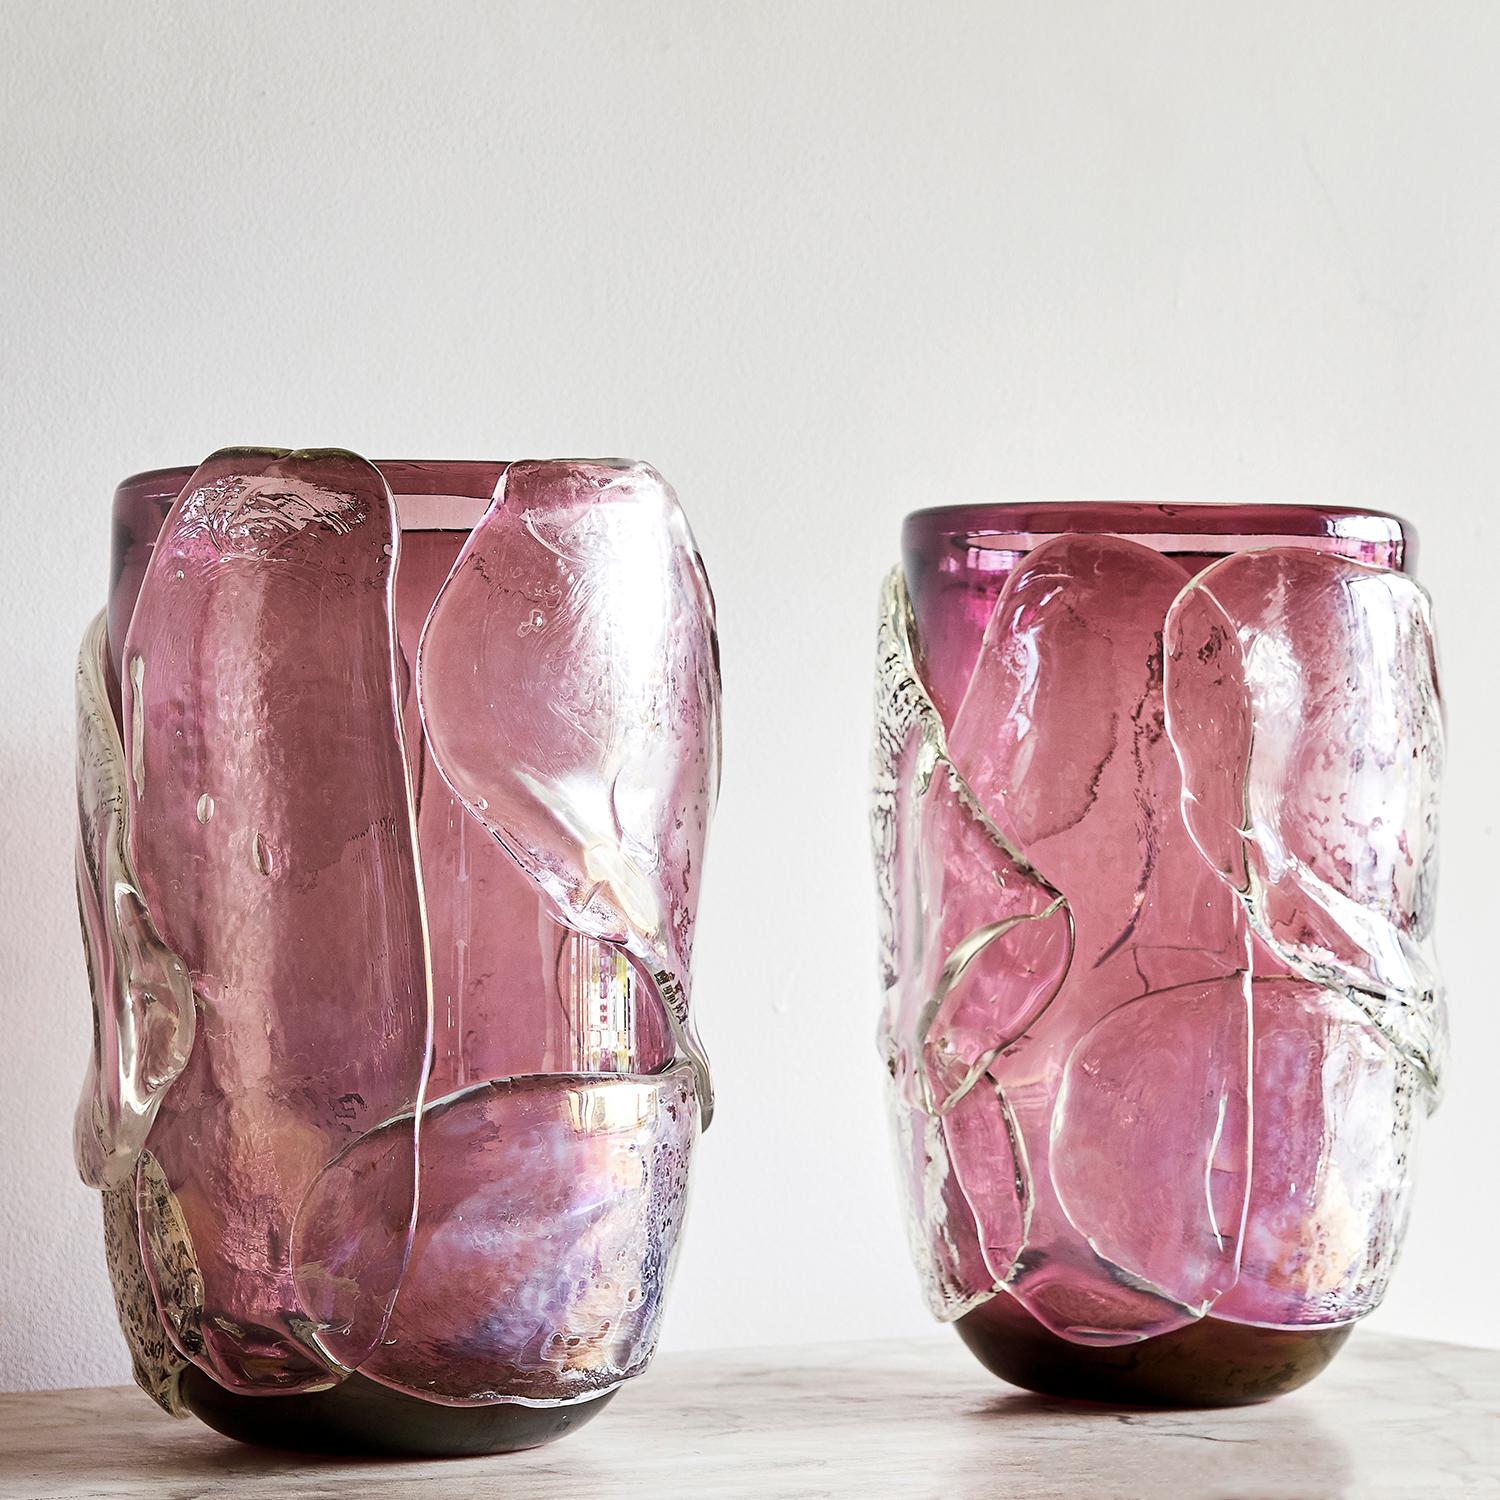 A lilac, vintage pair of Mid-Century Modern Italian hand blown Murano glass vases “Vetro Artistico di Murano” with clear amethyst and grey colored paneled design, in good condition. Wear consistent with age and use, circa 1960, Italy.

Measure: